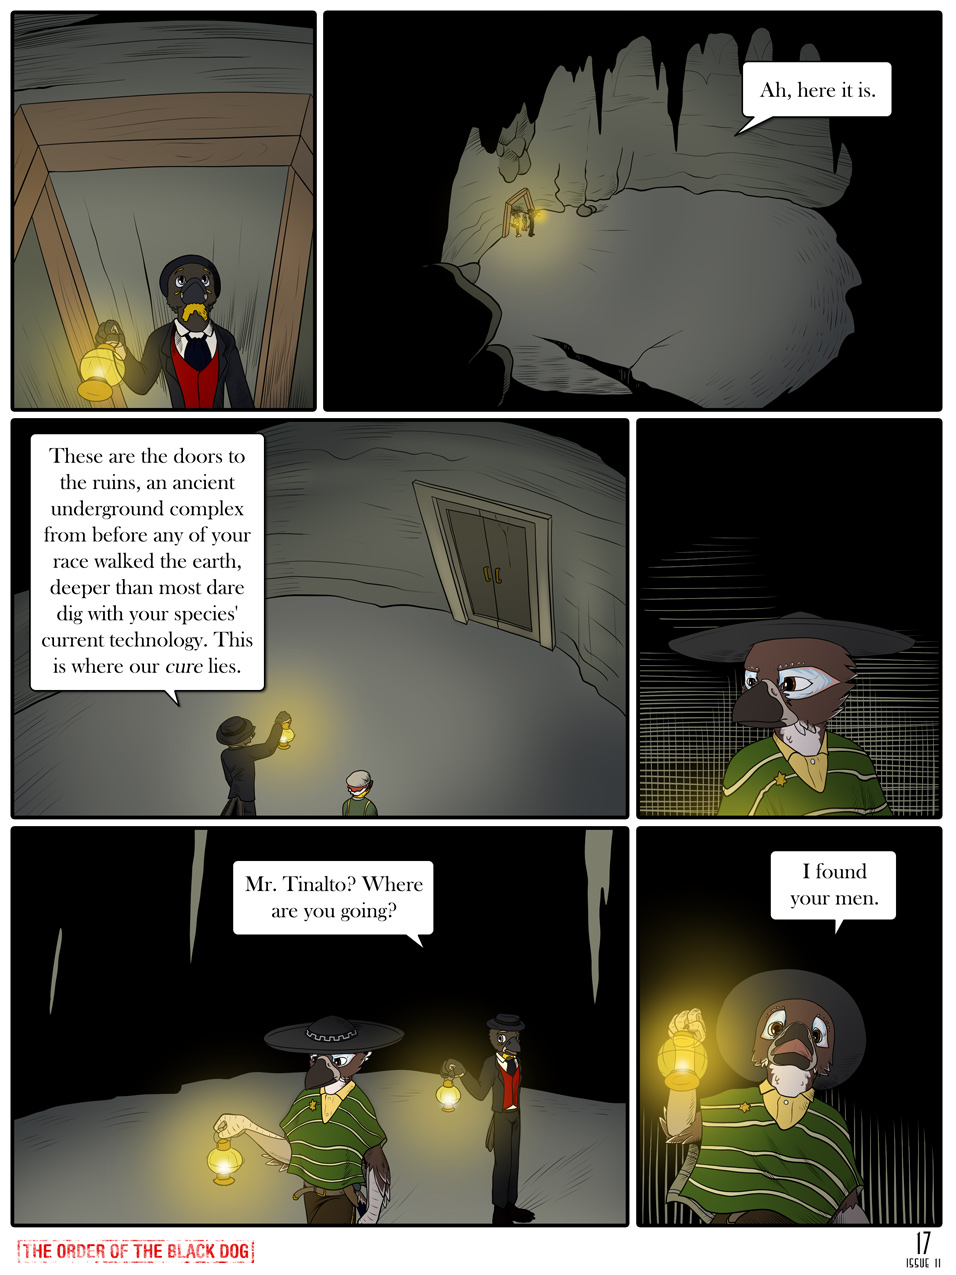 Issue 11, Page 17